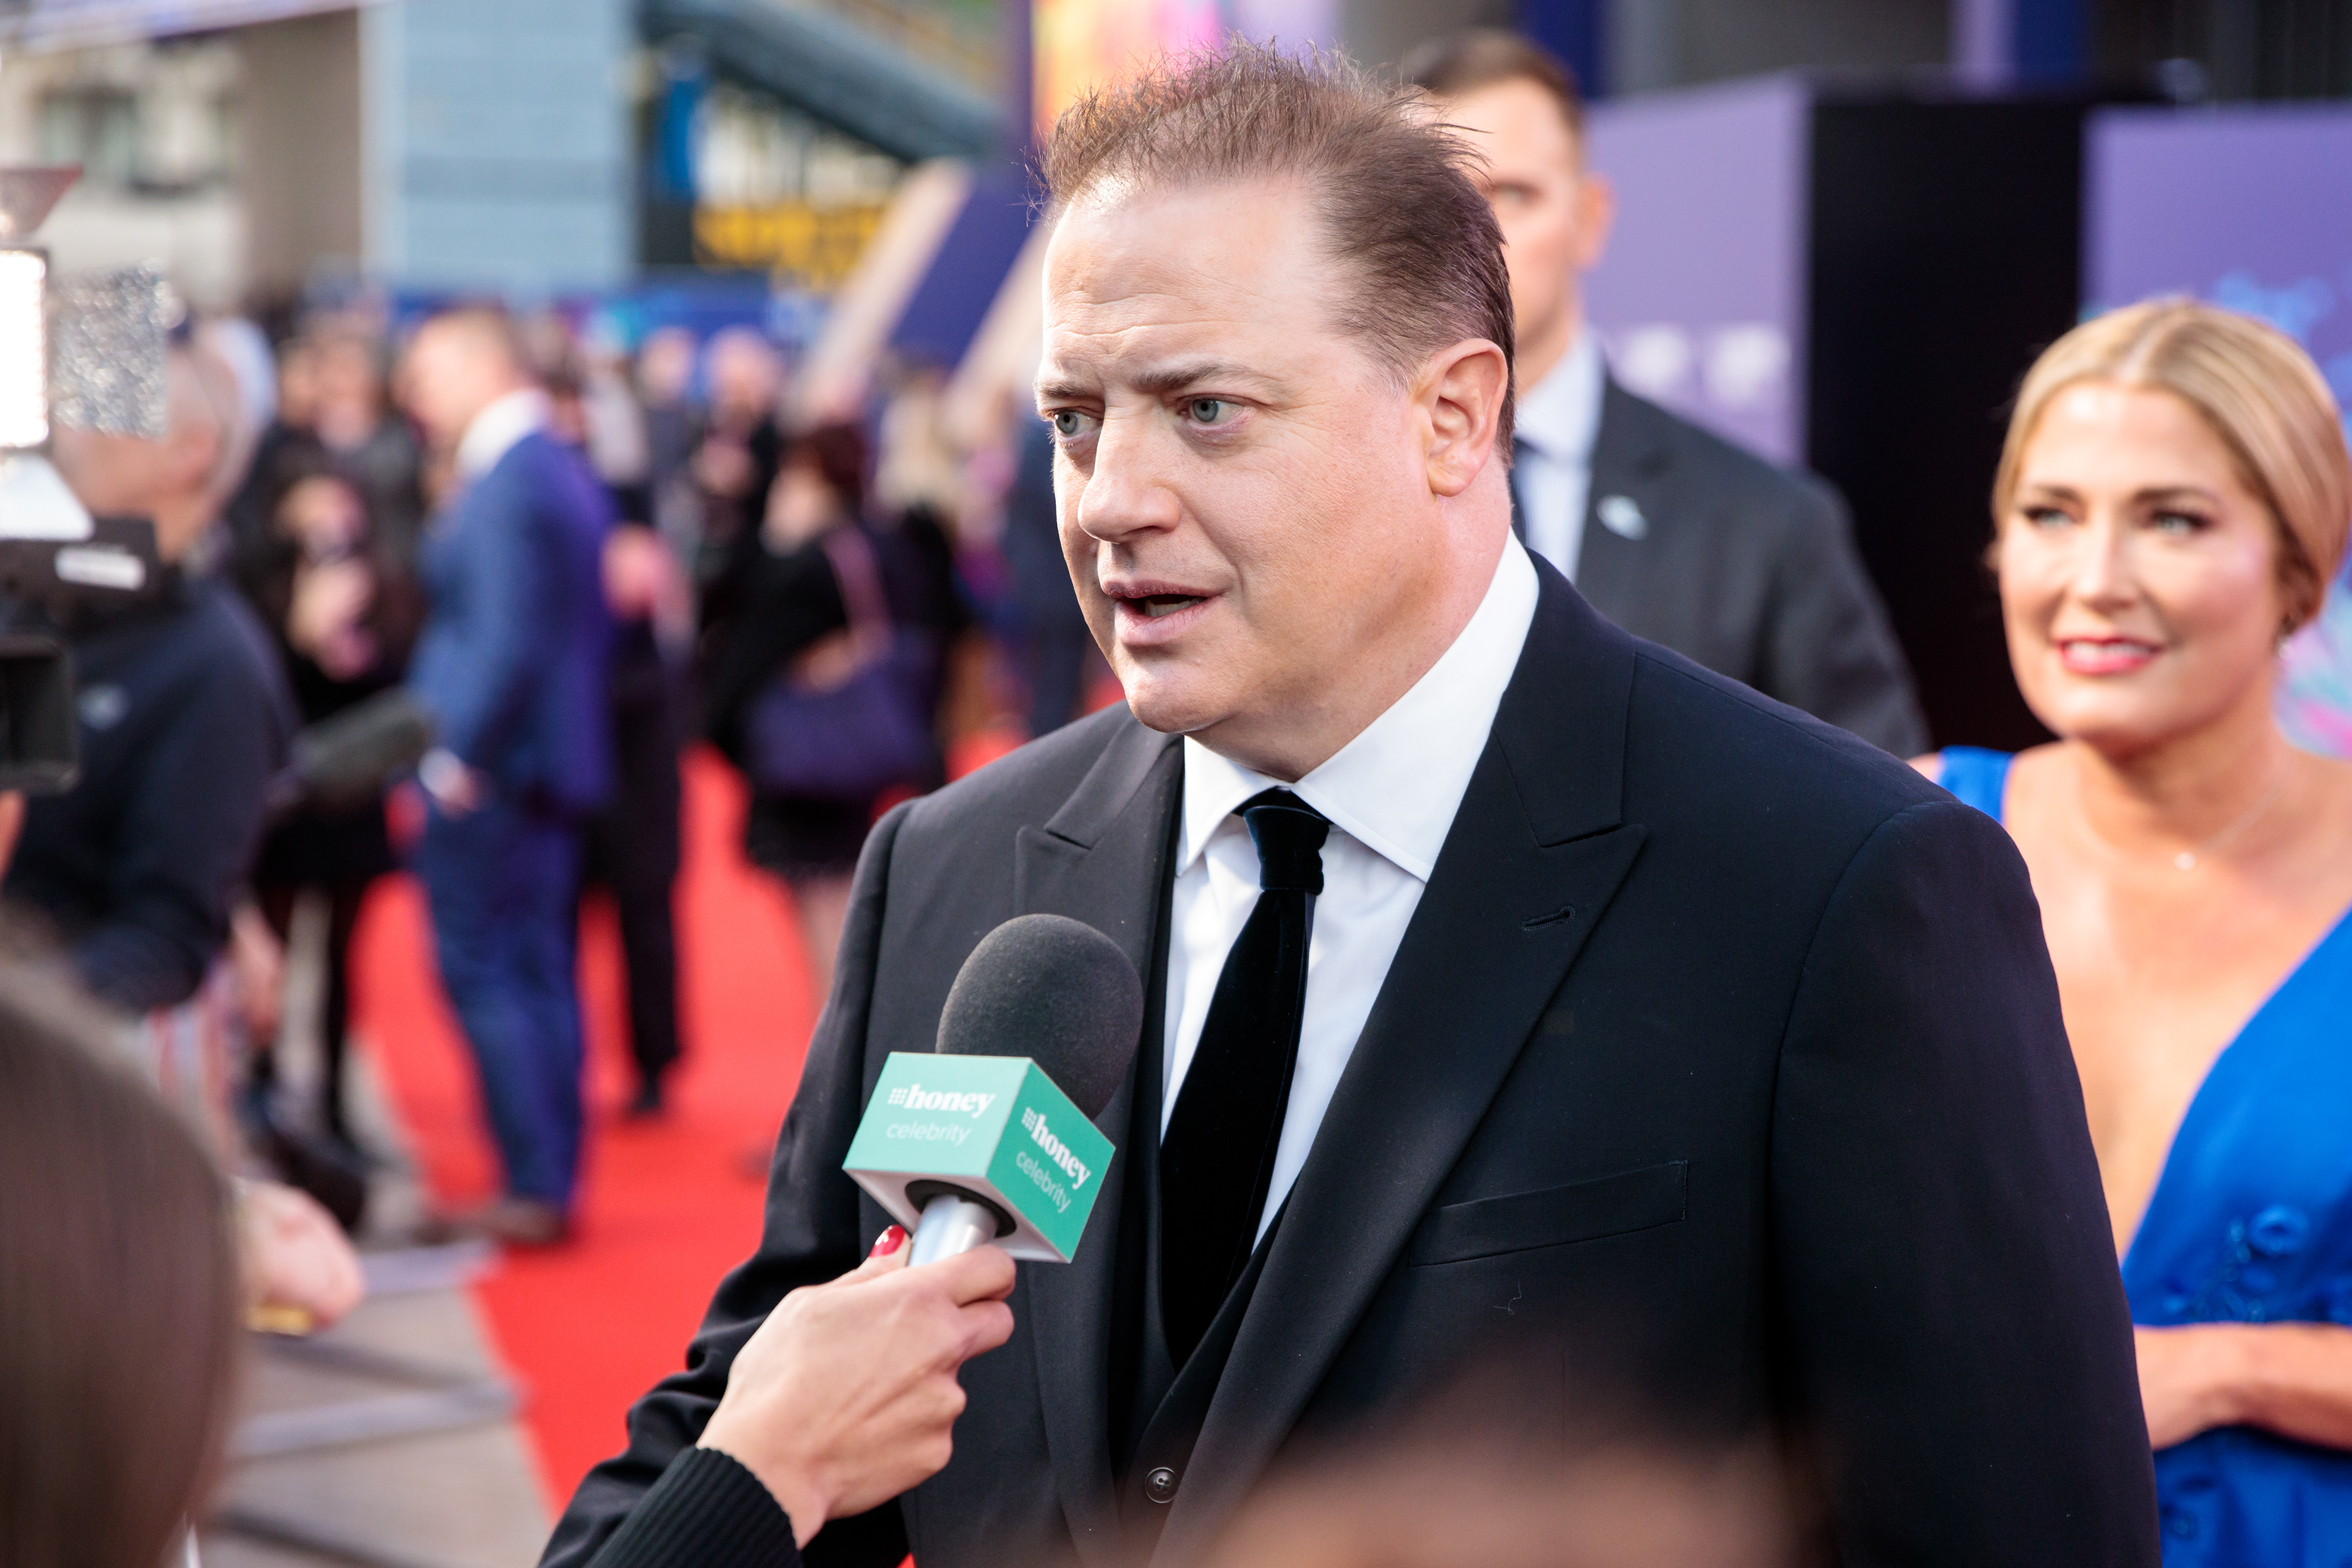 Brendan Fraser at the screening of The Whale at London Film Festival in London, England on 11th October 2022